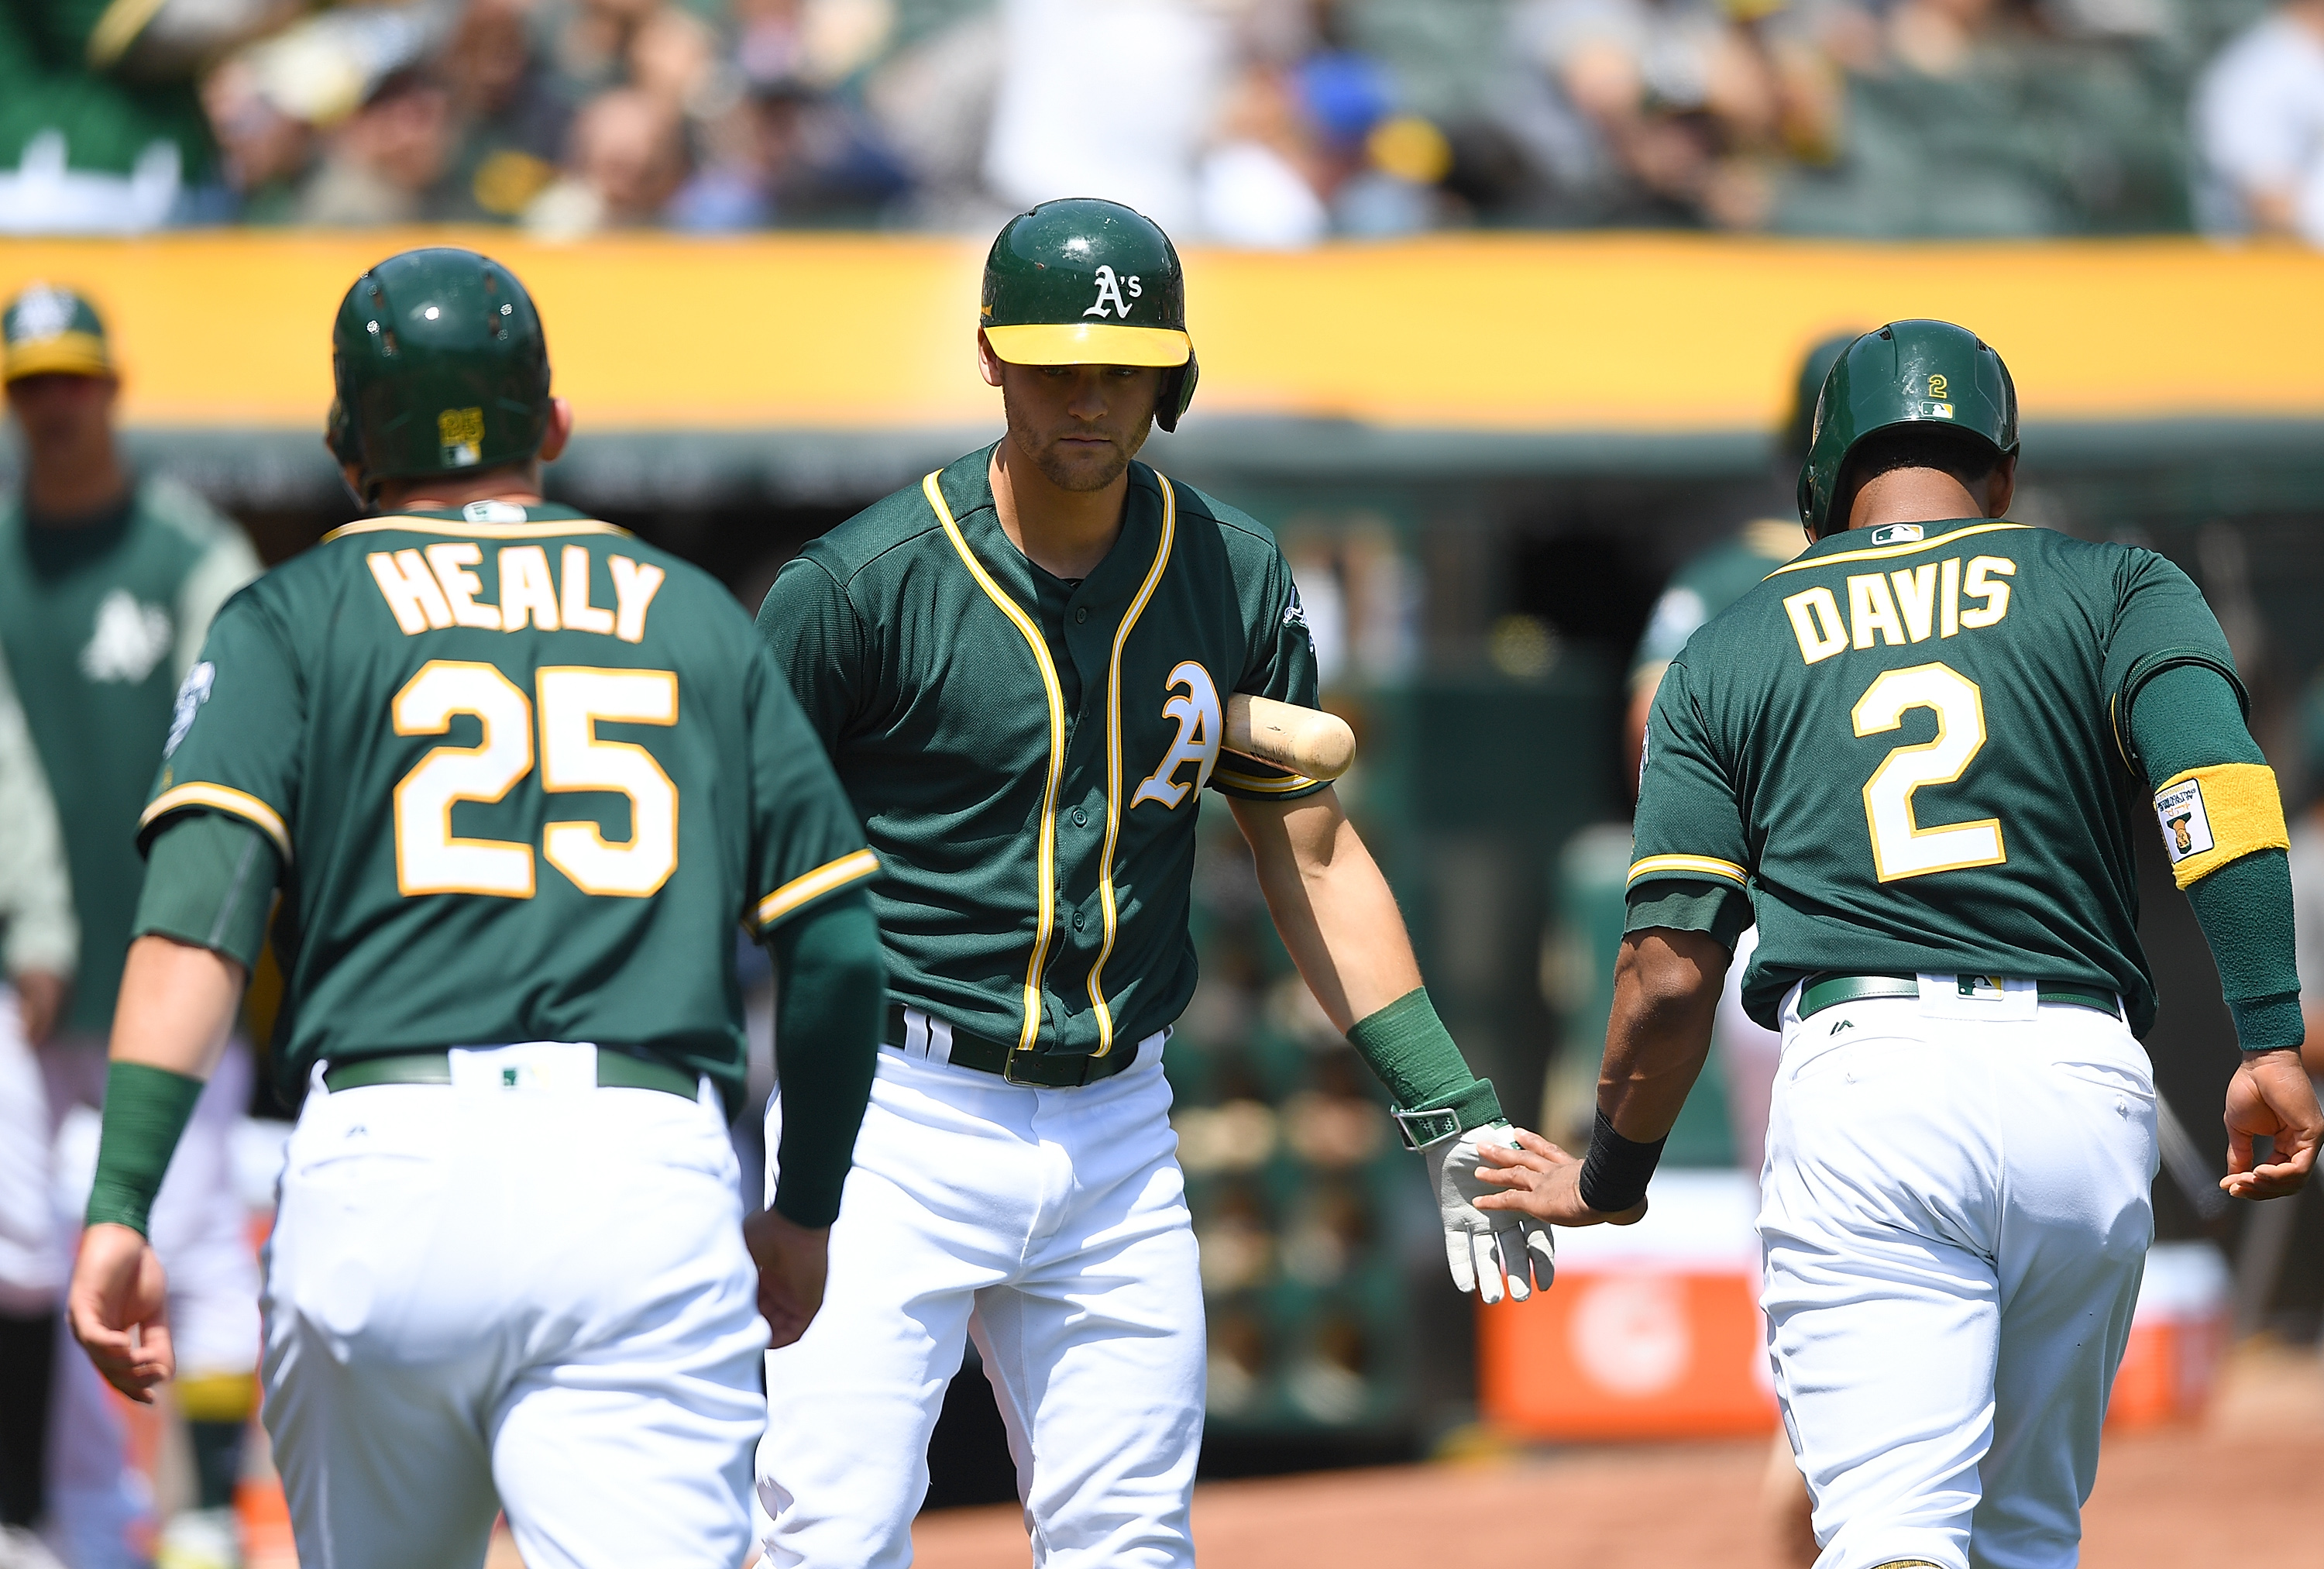 OAKLAND, CA - APRIL 19: Khris Davis #2 and Ryon Healy #25 of the Oakland Athletics are congratulated by Chad Pinder #18 after Davis and Healy both scored against the Texas Rangers in the bottom of the first inning at Oakland Alameda Coliseum on April 19, 2017 in Oakland, California. 